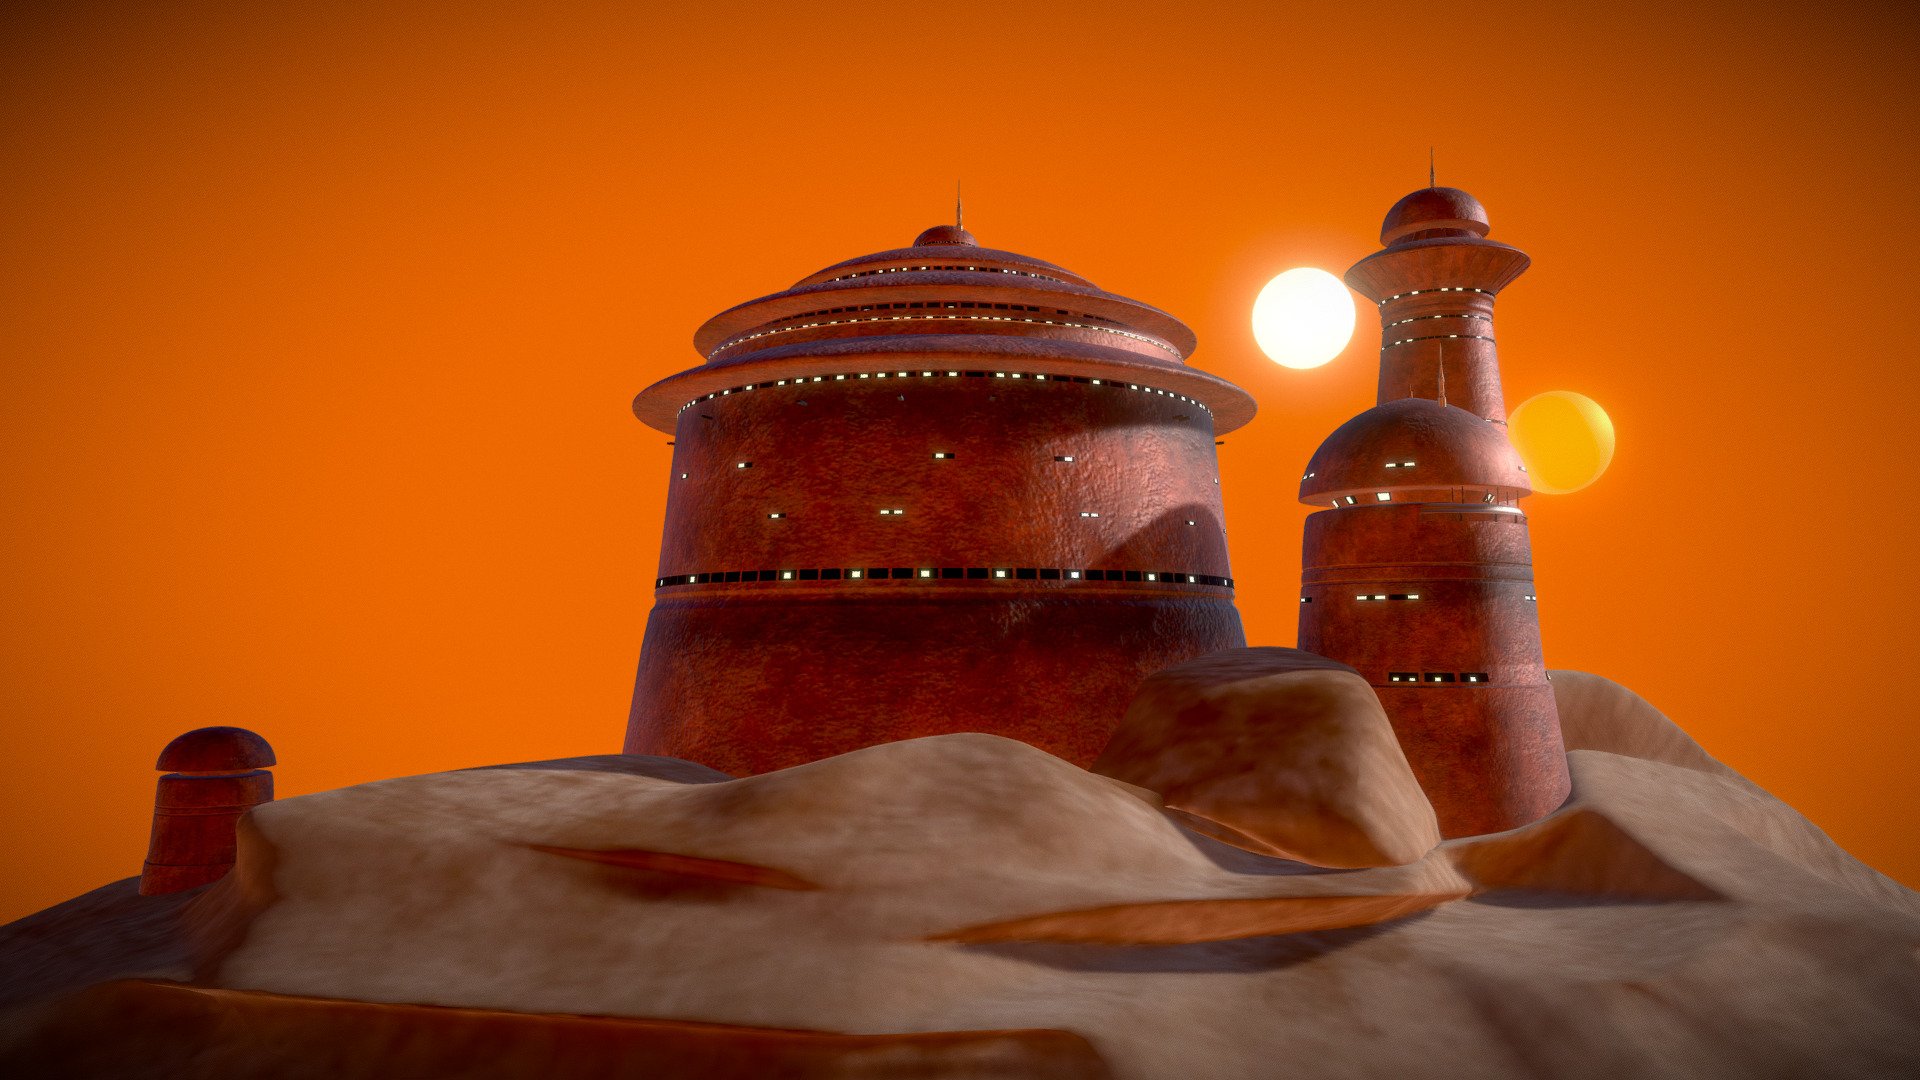 Jabba_Palace_Star_Wars
Jabba_Palace_Star_Wars.zip 83 MB
Made with Cinema4D included textures.

FBX file / tested with C4D and Marmoset Toolbag 3d model